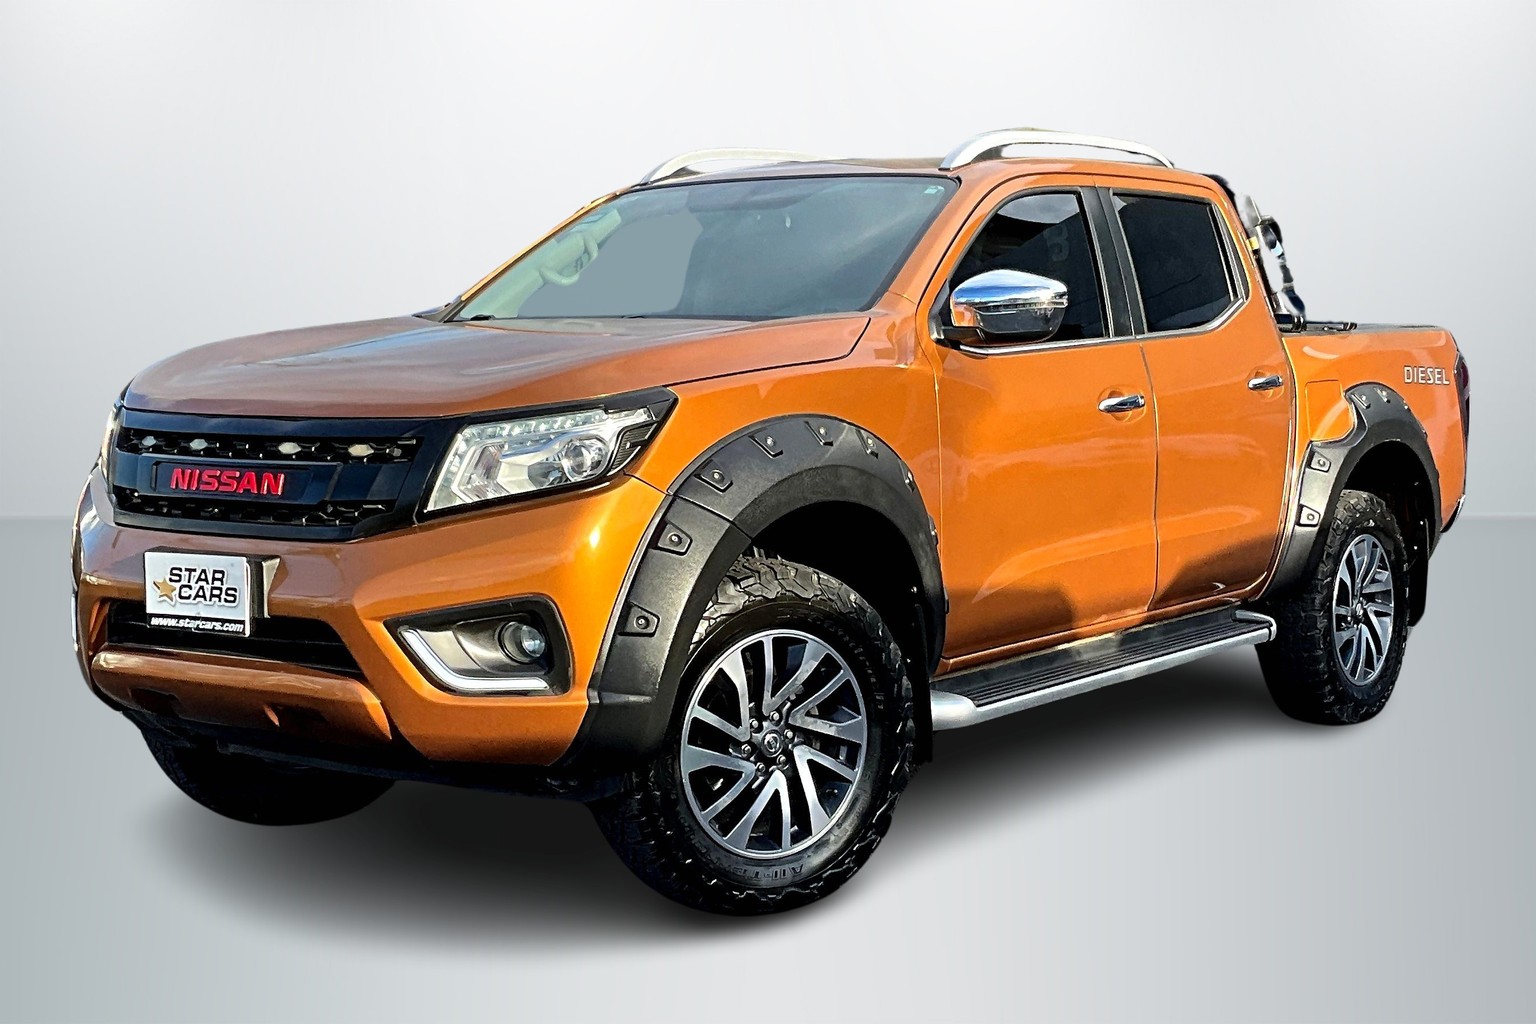 https://starcars.com/listing/nissan-frontier-2017/